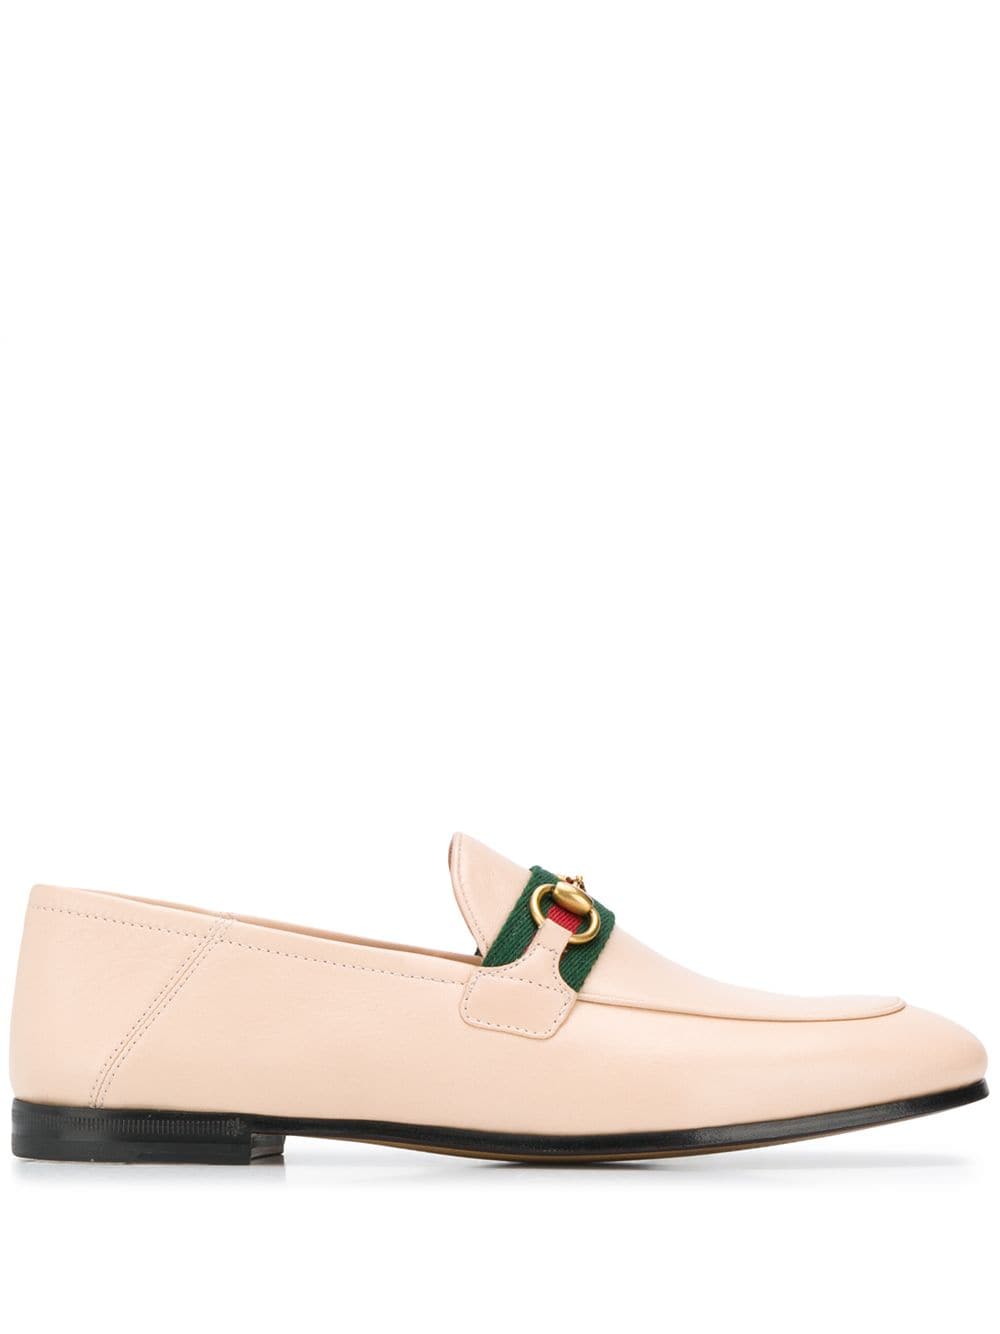 Gucci Loafers met webdetail - Beige